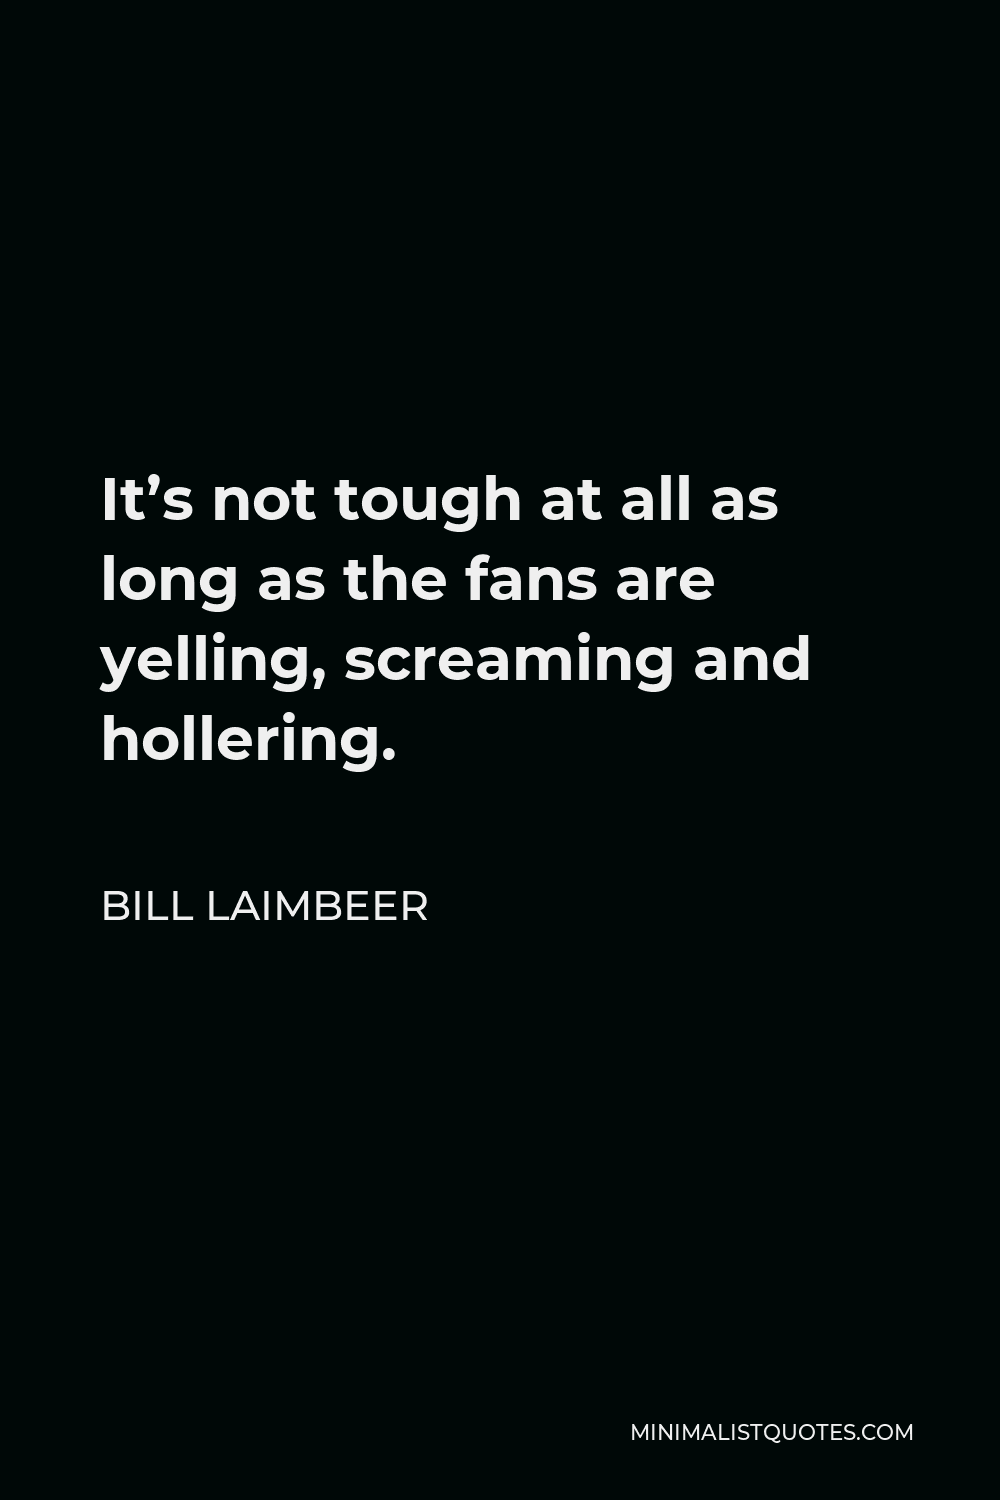 Bill Laimbeer Quote - It’s not tough at all as long as the fans are yelling, screaming and hollering.